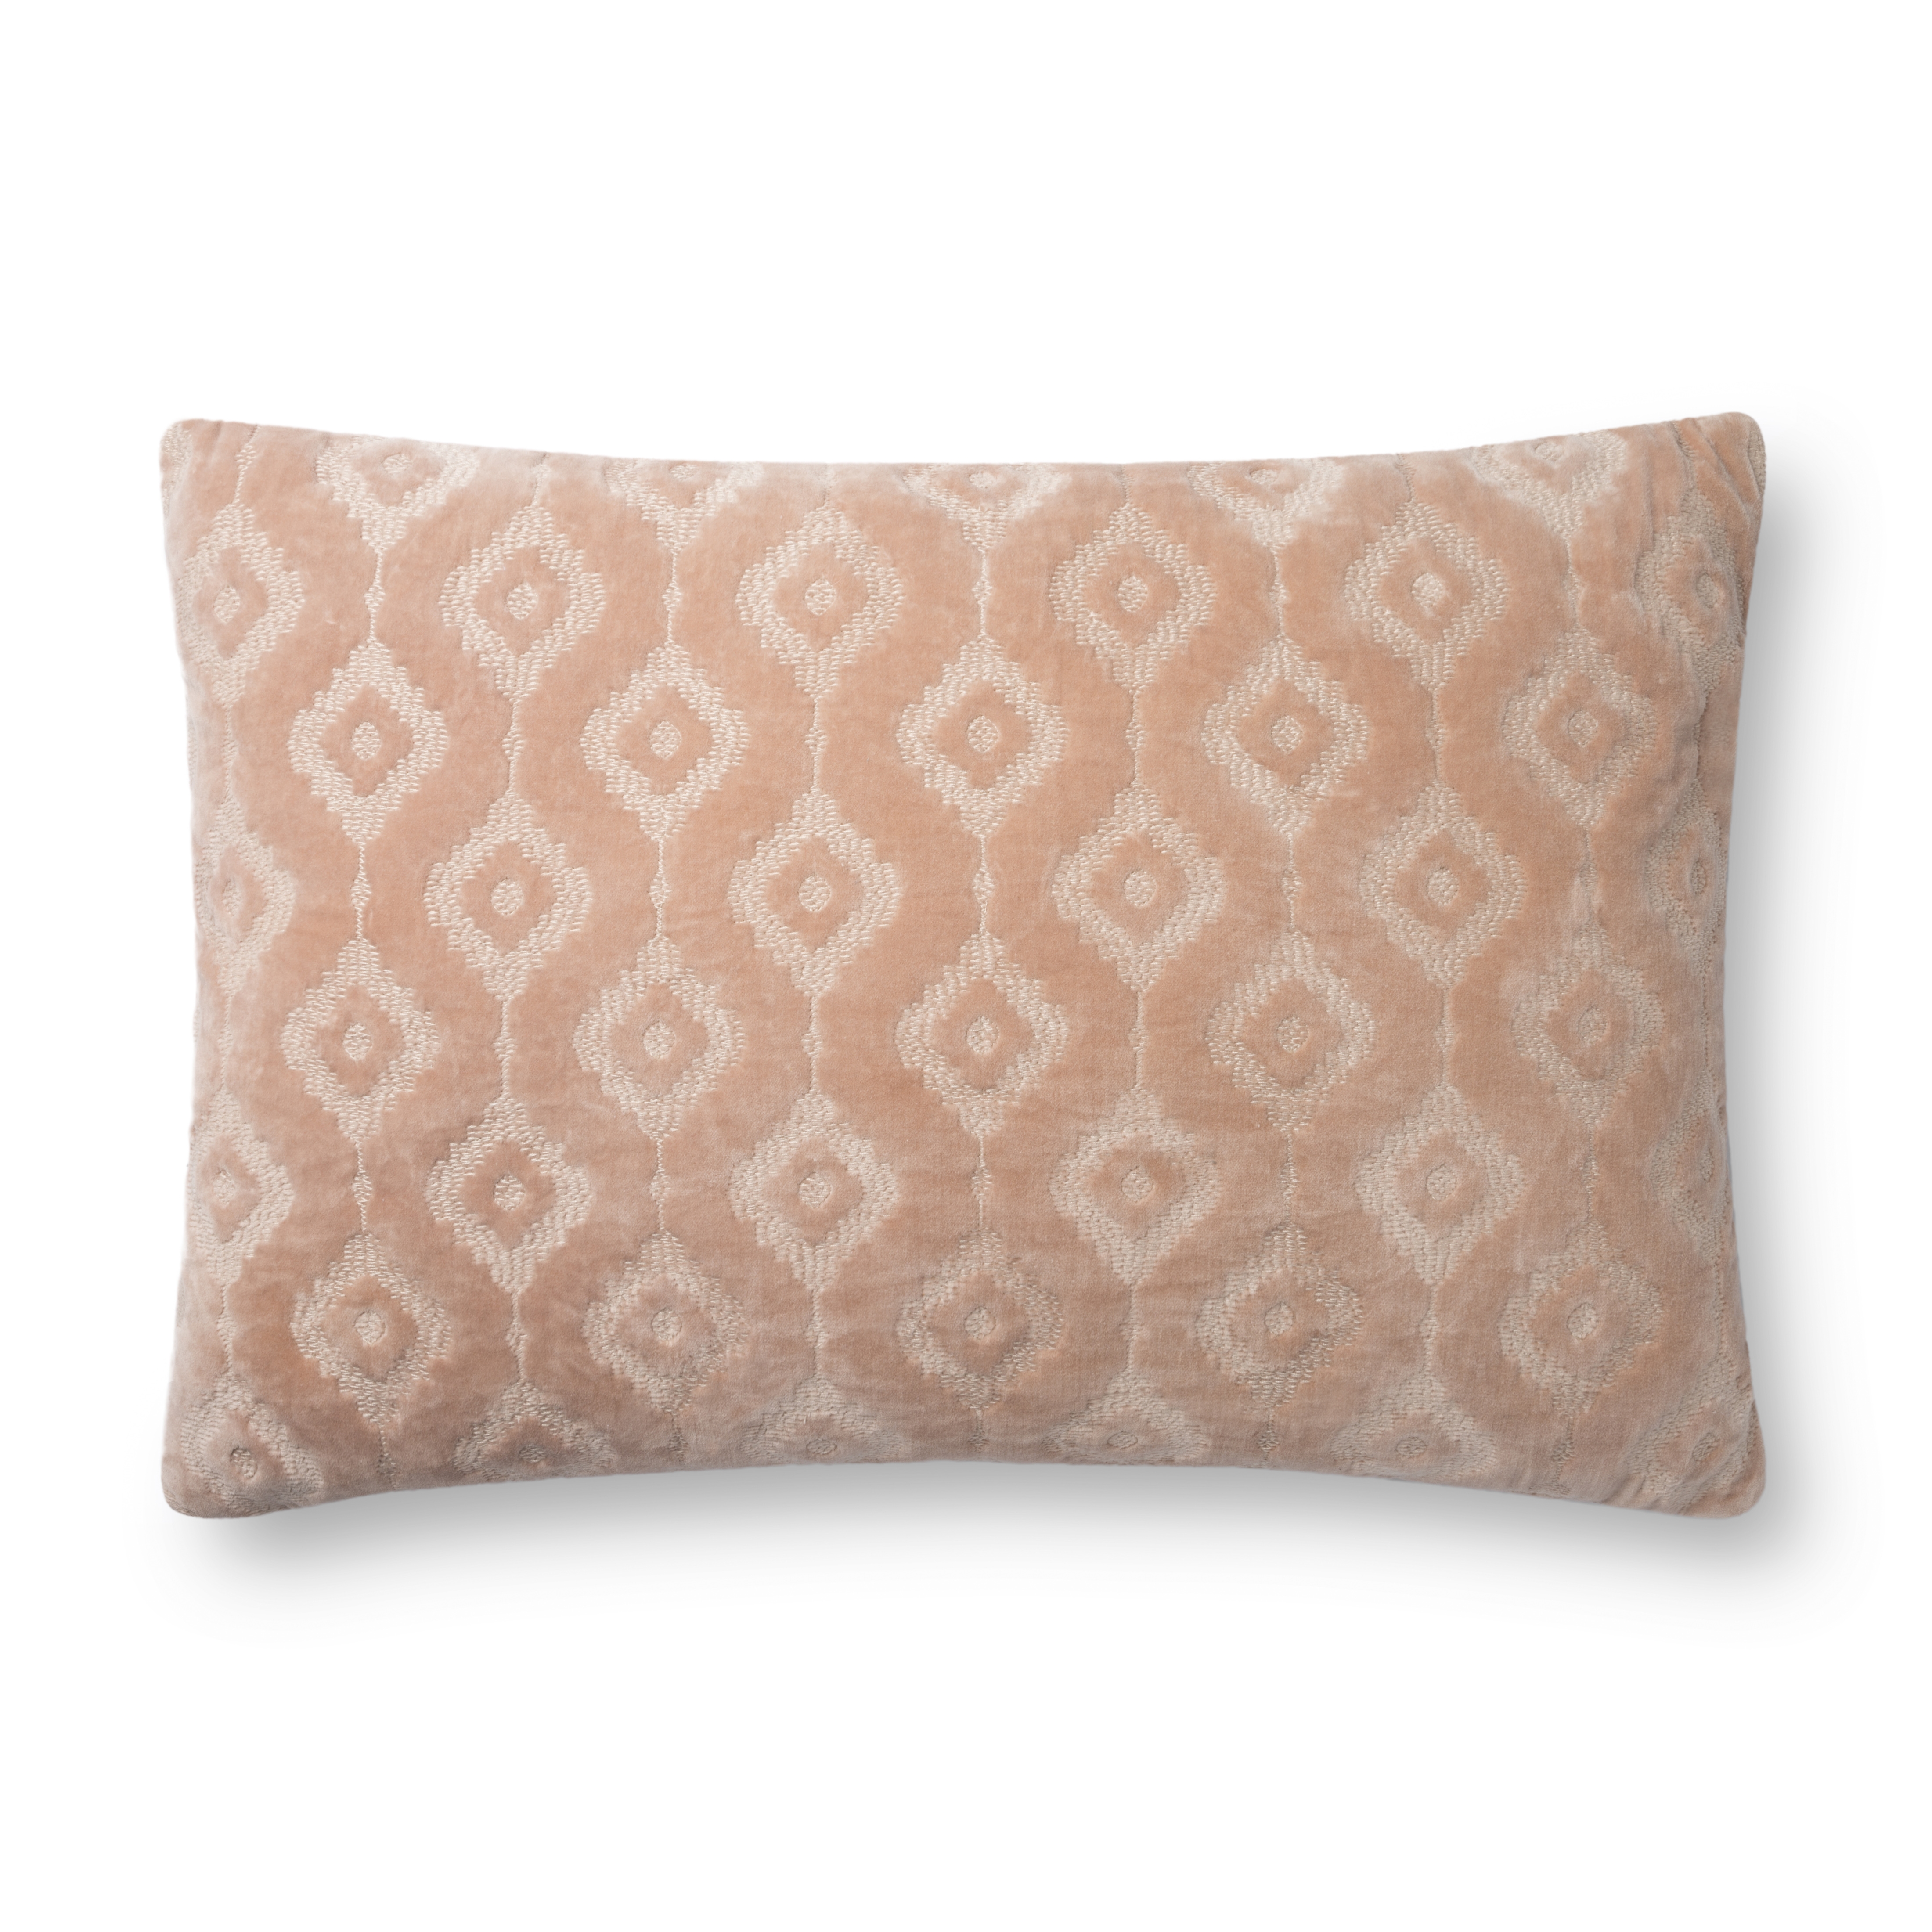 Loloi Pillows P0866 Blush 16" x 26" Cover Only - Image 0